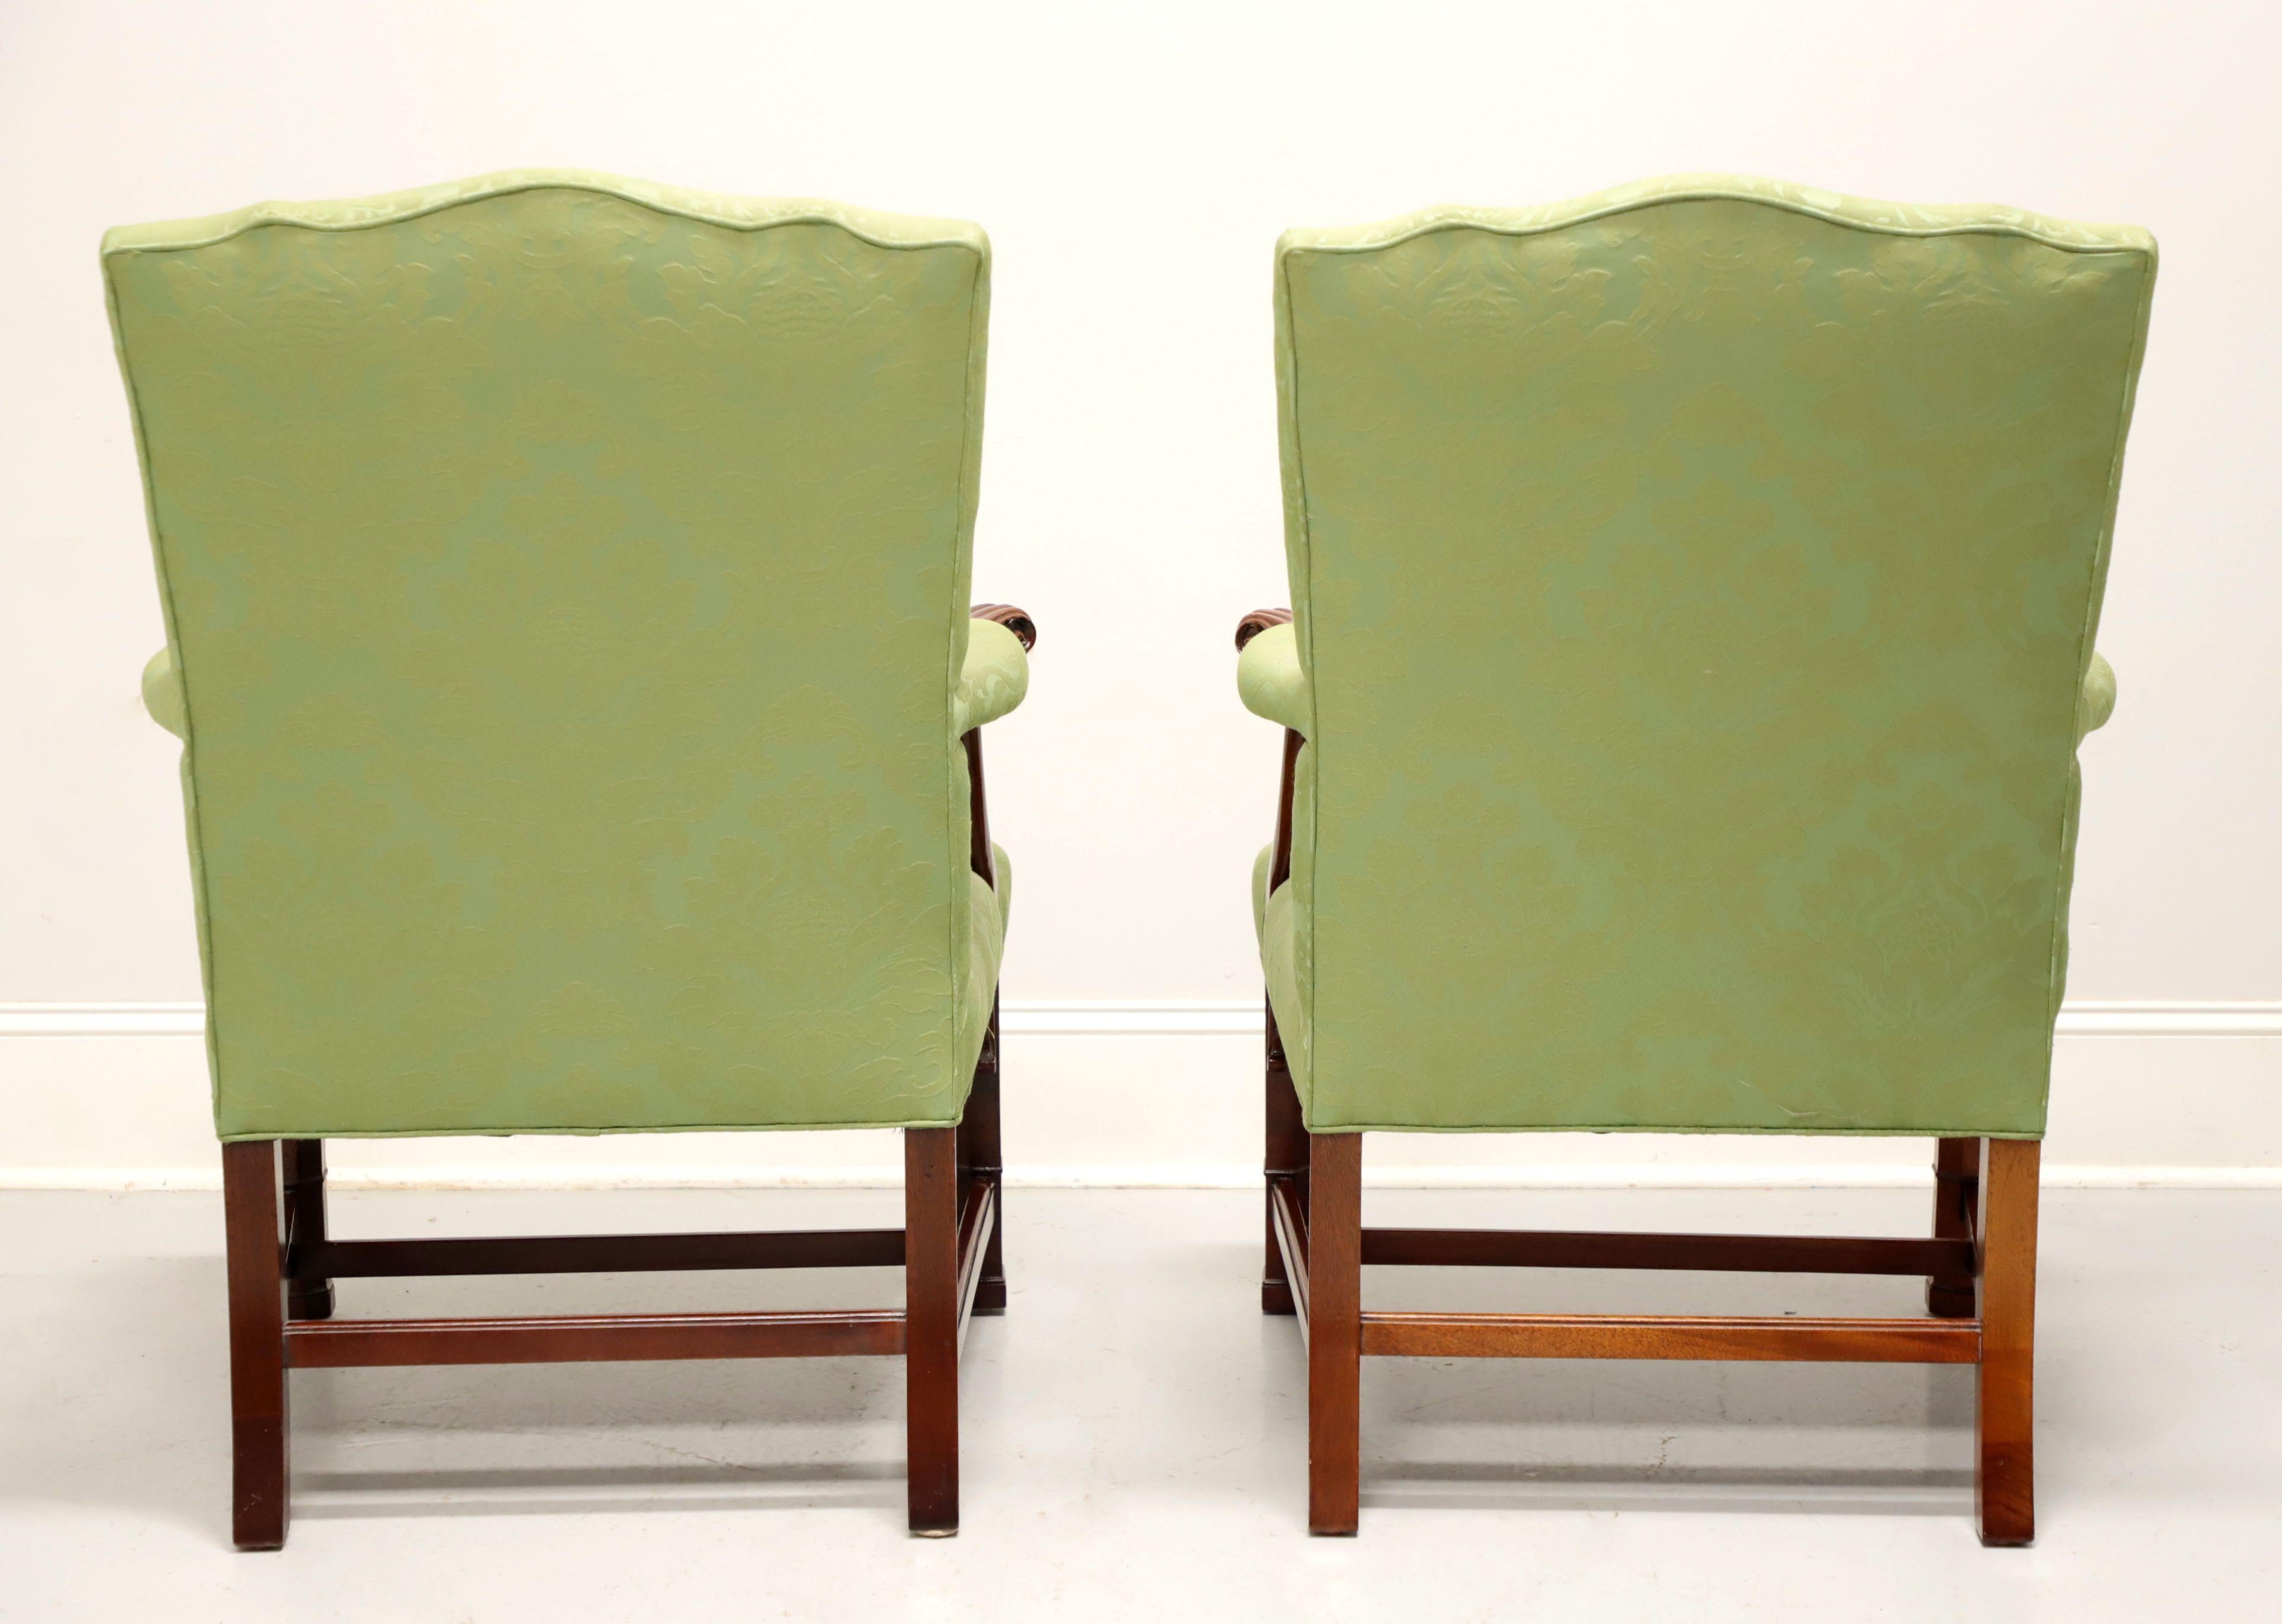 20th Century SOUTHWOOD Gainsborough Mahogany Chippendale Style Fretwork Armchairs - Pair For Sale